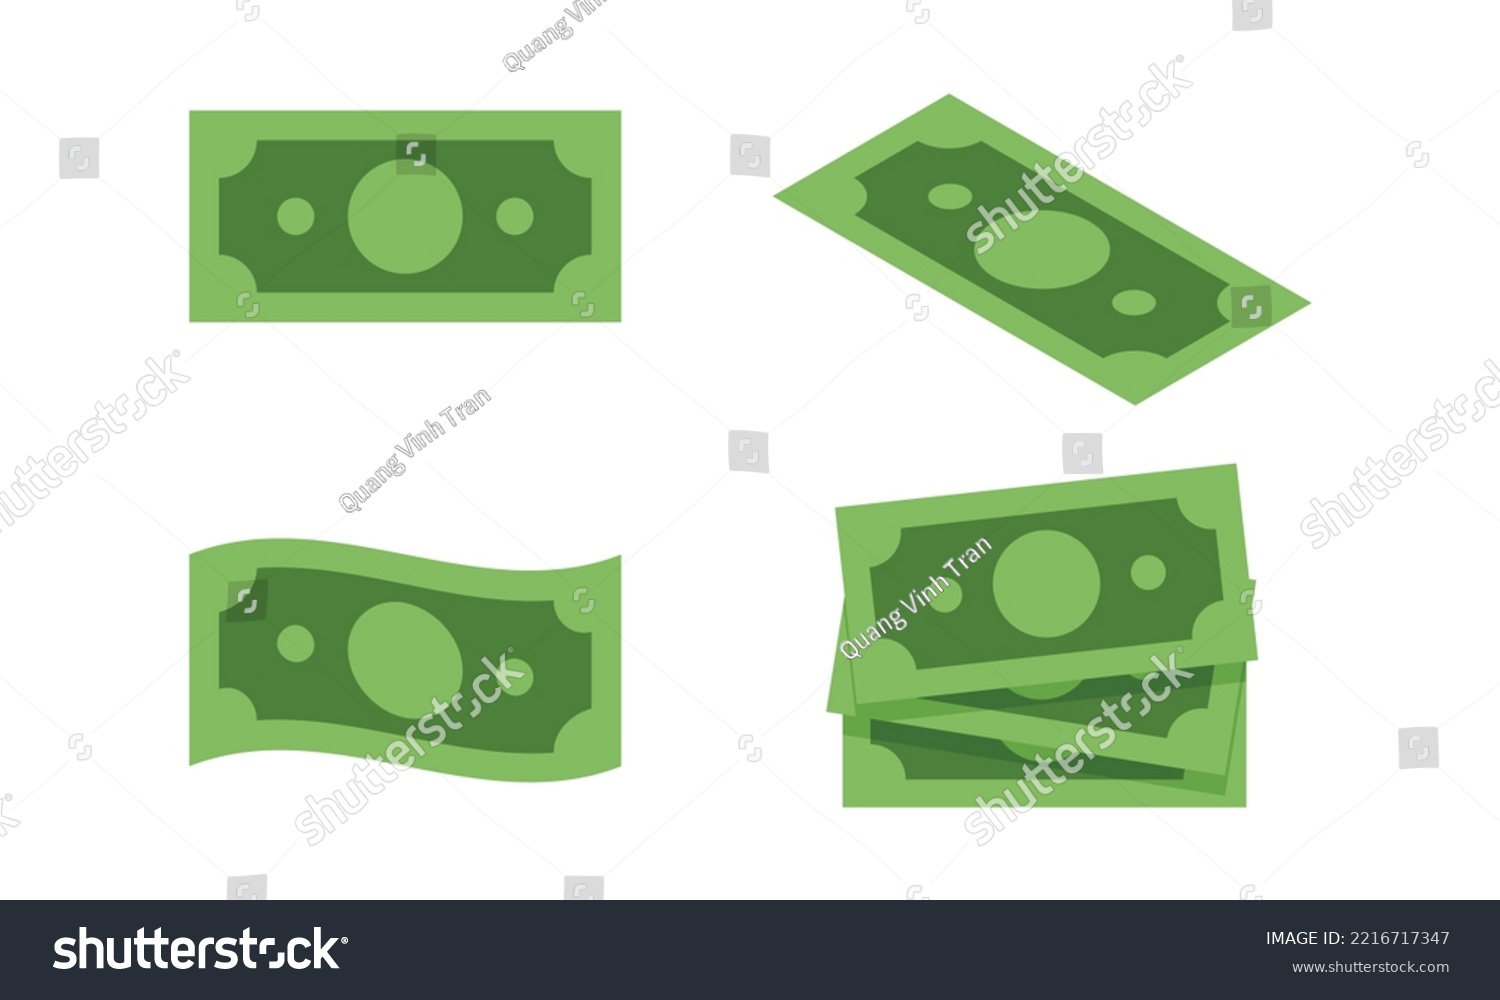 SVG of Paper money clipart. Cash vector design illustration. Green banknote one dollar bills in different poses flat icon cartoon isometric style. Money, banknote, investment, finance, wealth, budget concept svg